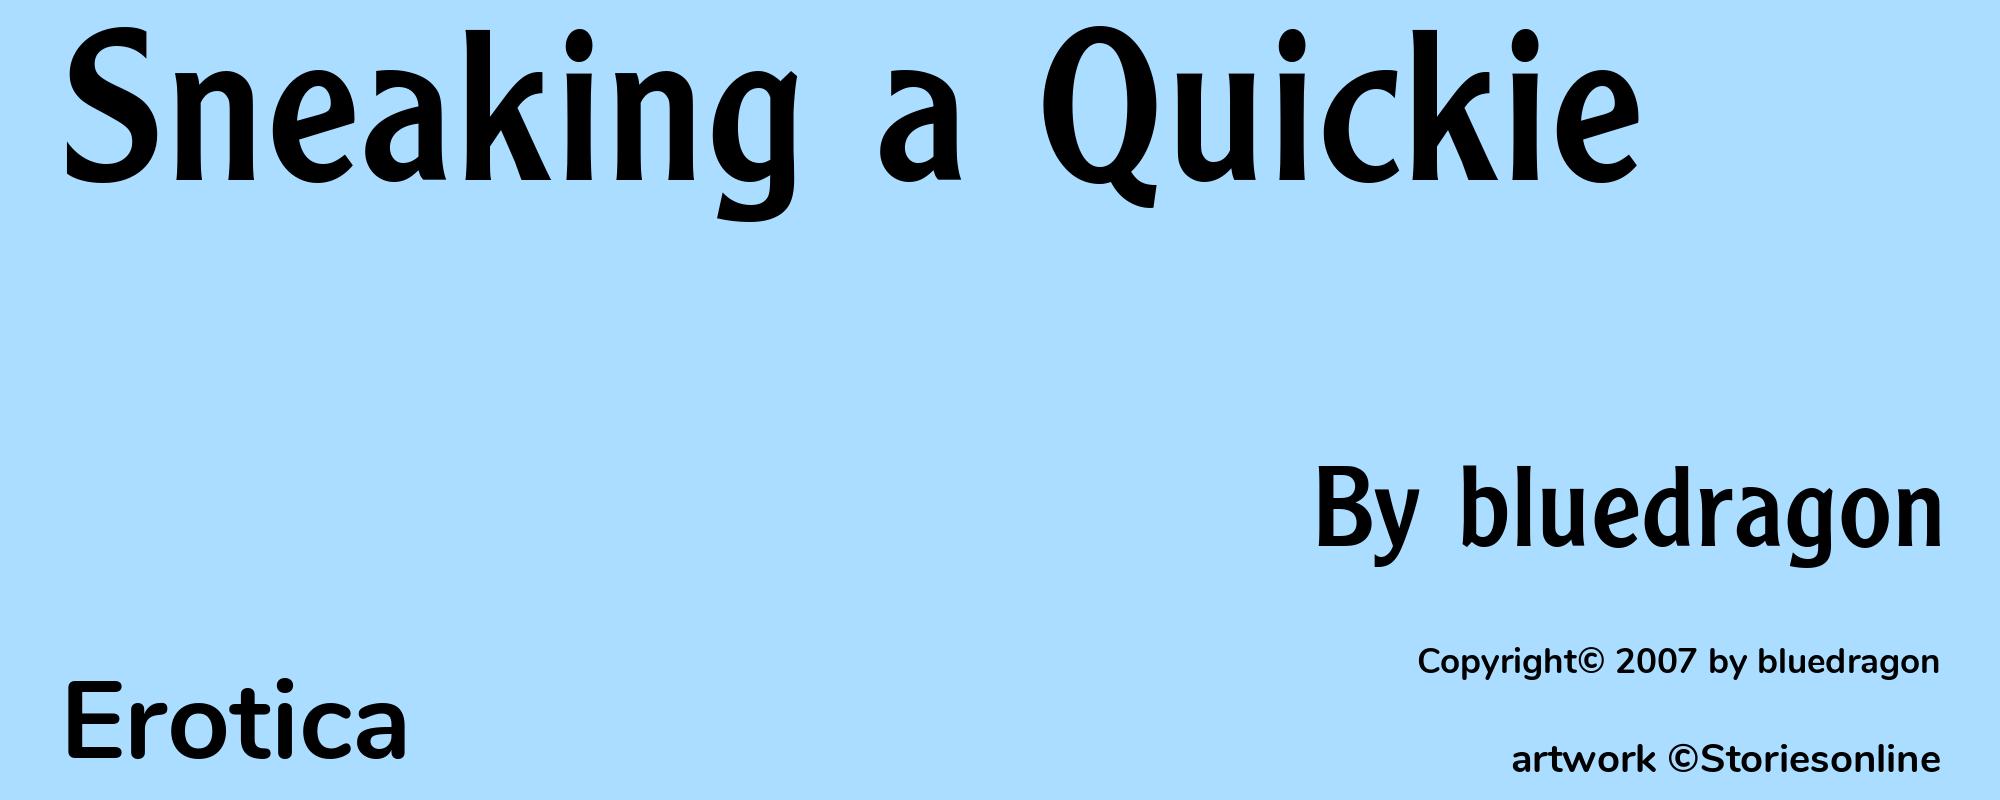 Sneaking a Quickie - Cover